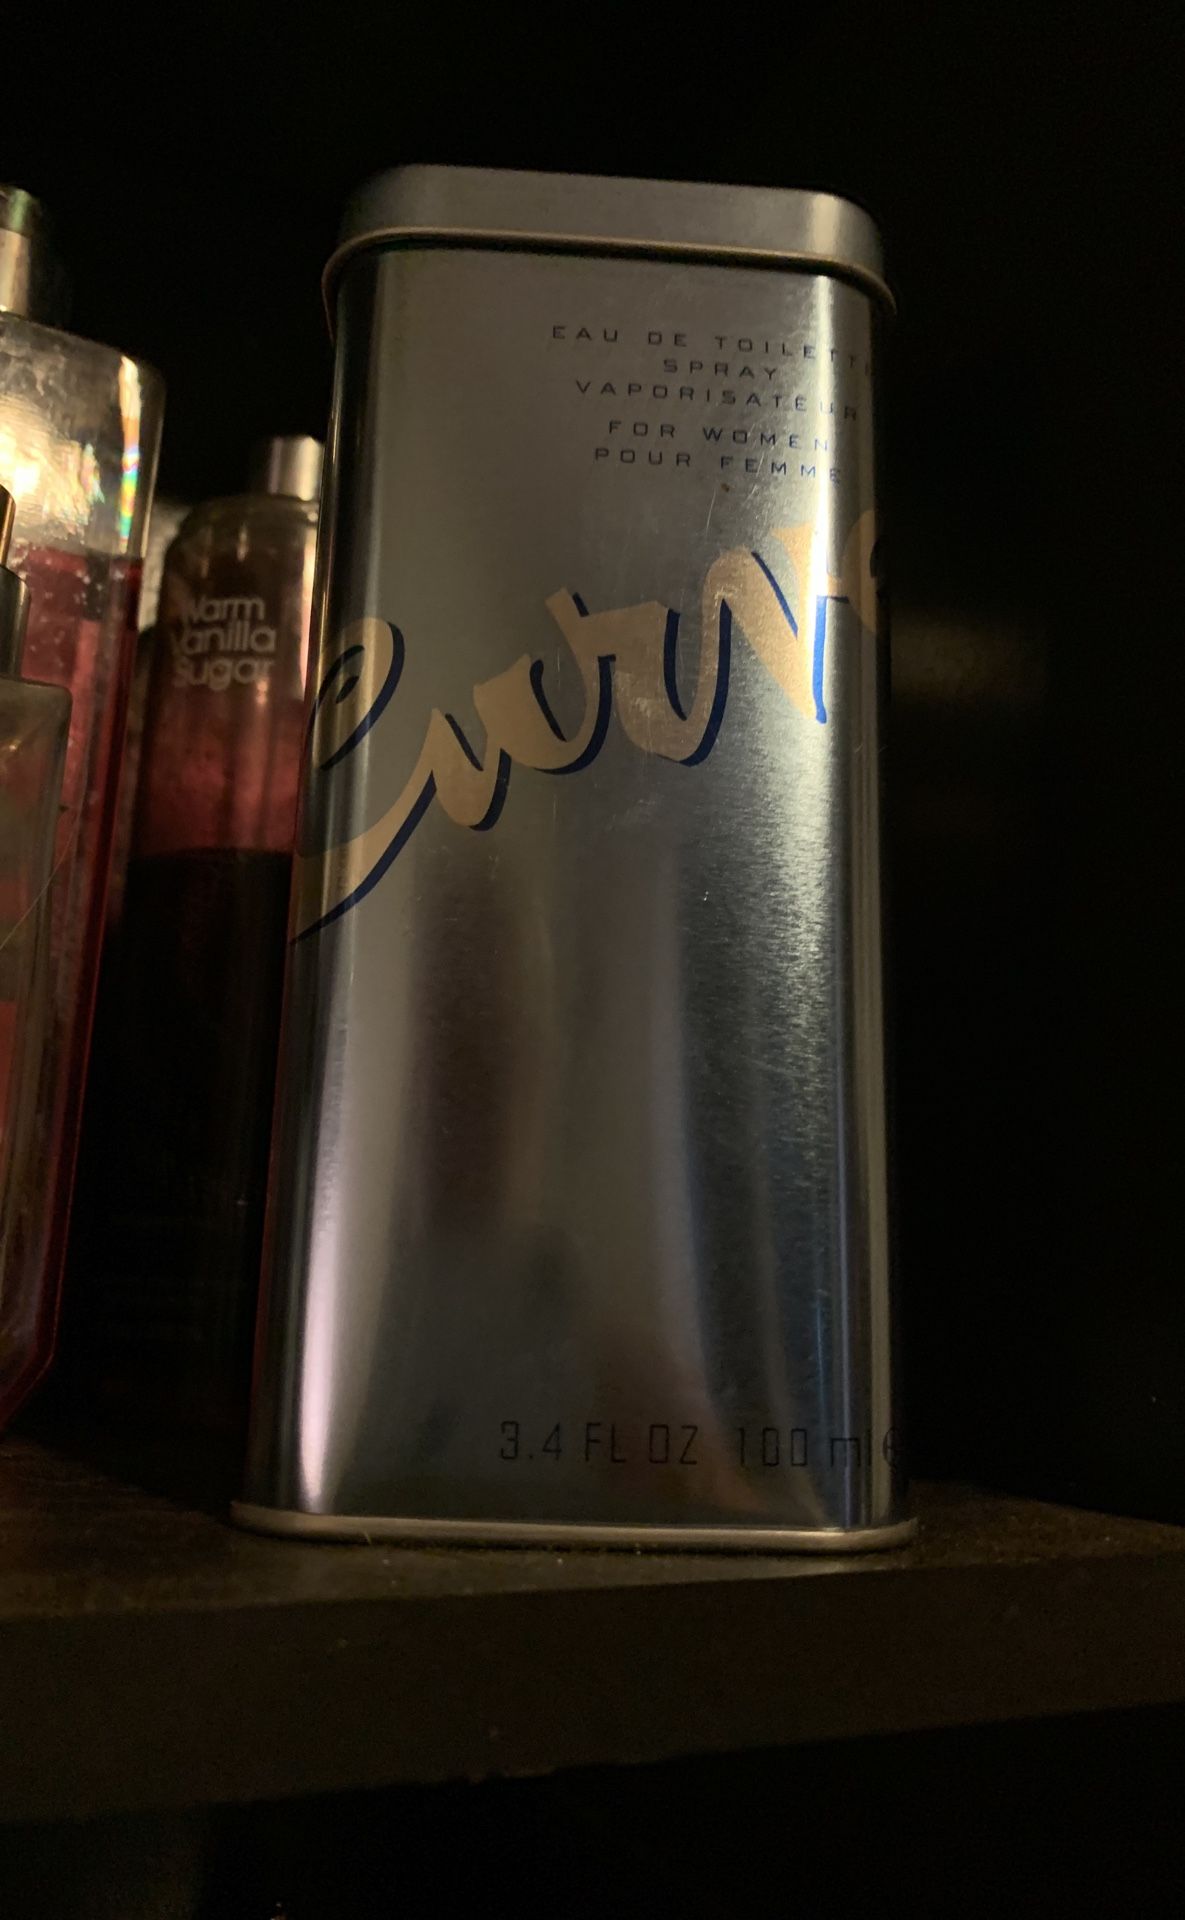 Curve perfume never opened or used.